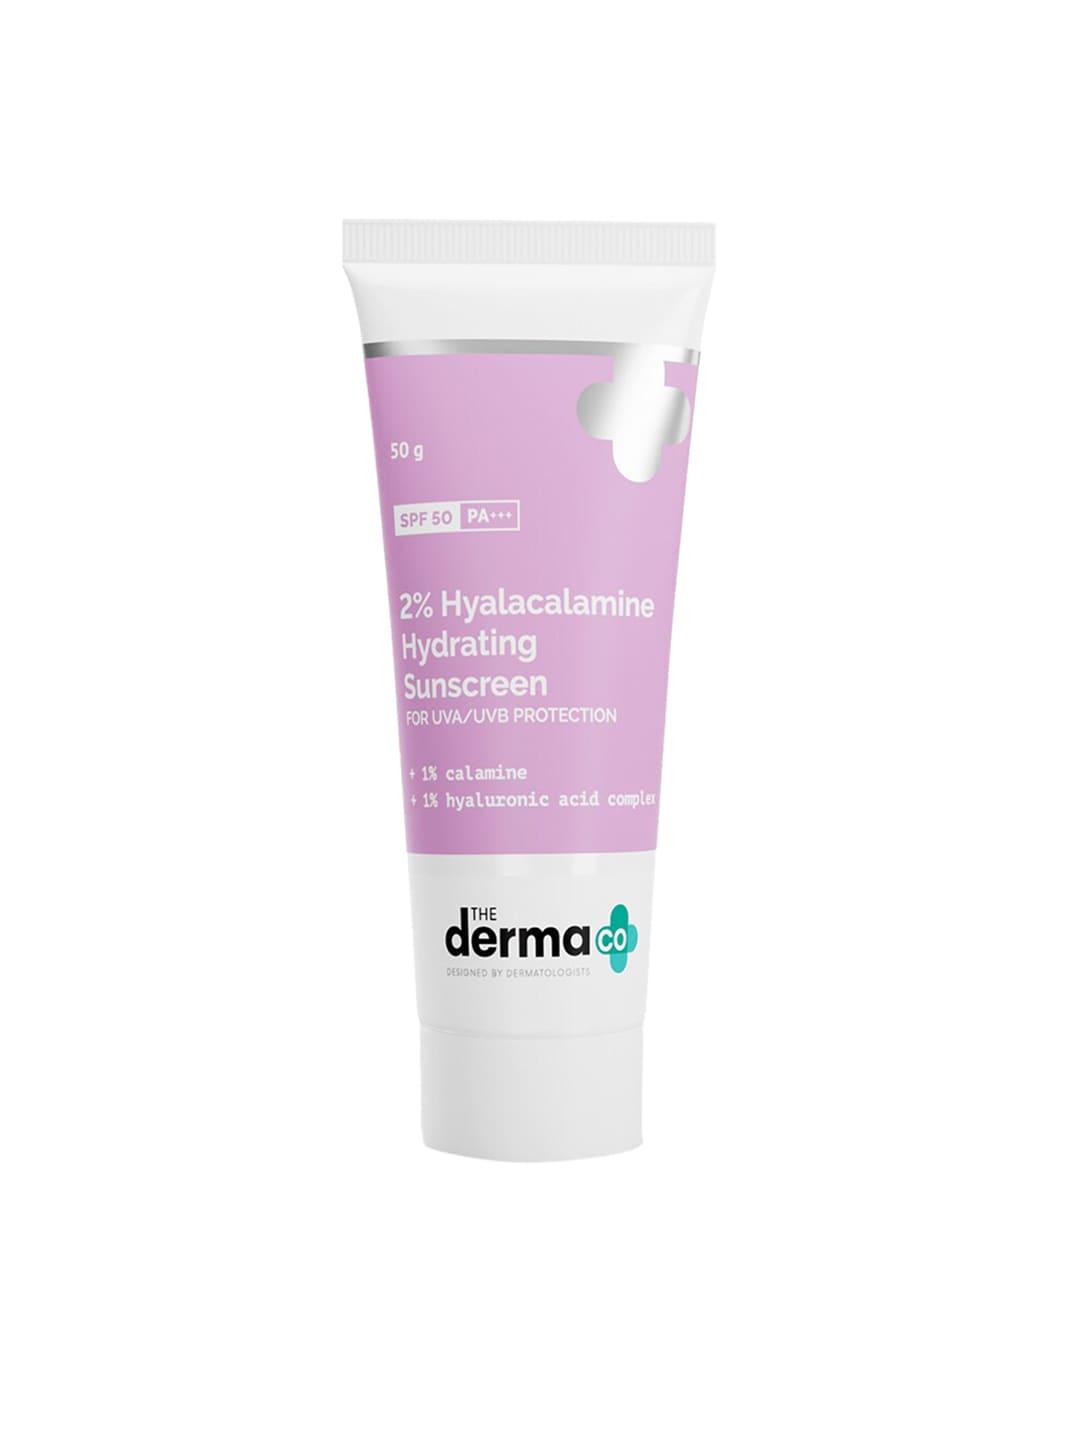 The Derma co. 2% Hyalacalamine Hydrating Sunscreen SPF50 & PA+++ - 50g